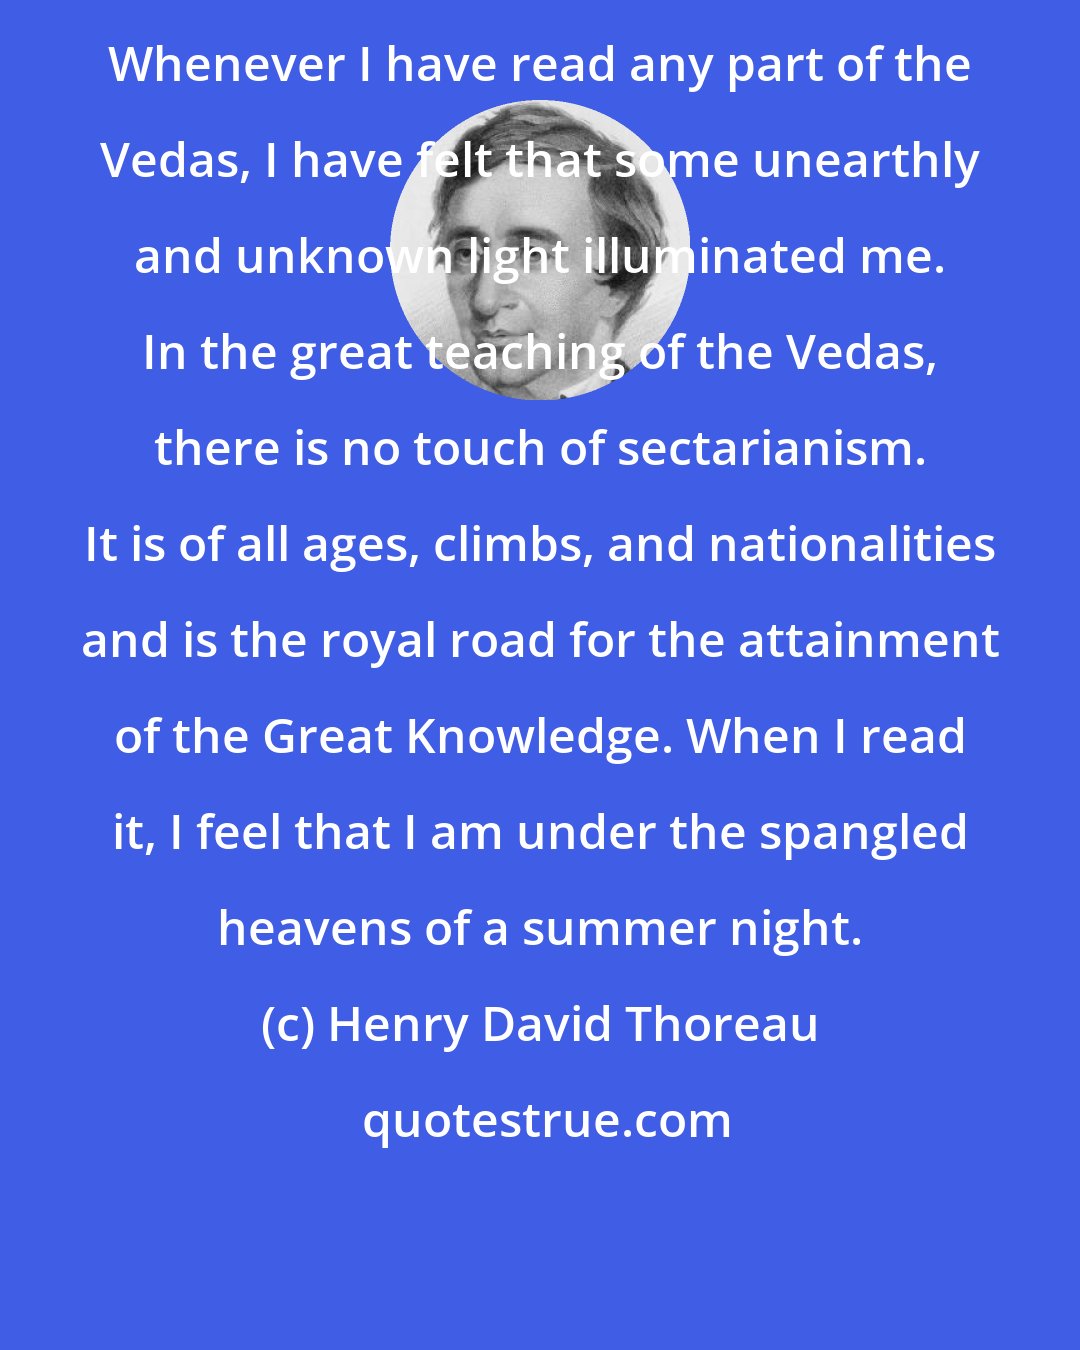 Henry David Thoreau: Whenever I have read any part of the Vedas, I have felt that some unearthly and unknown light illuminated me. In the great teaching of the Vedas, there is no touch of sectarianism. It is of all ages, climbs, and nationalities and is the royal road for the attainment of the Great Knowledge. When I read it, I feel that I am under the spangled heavens of a summer night.